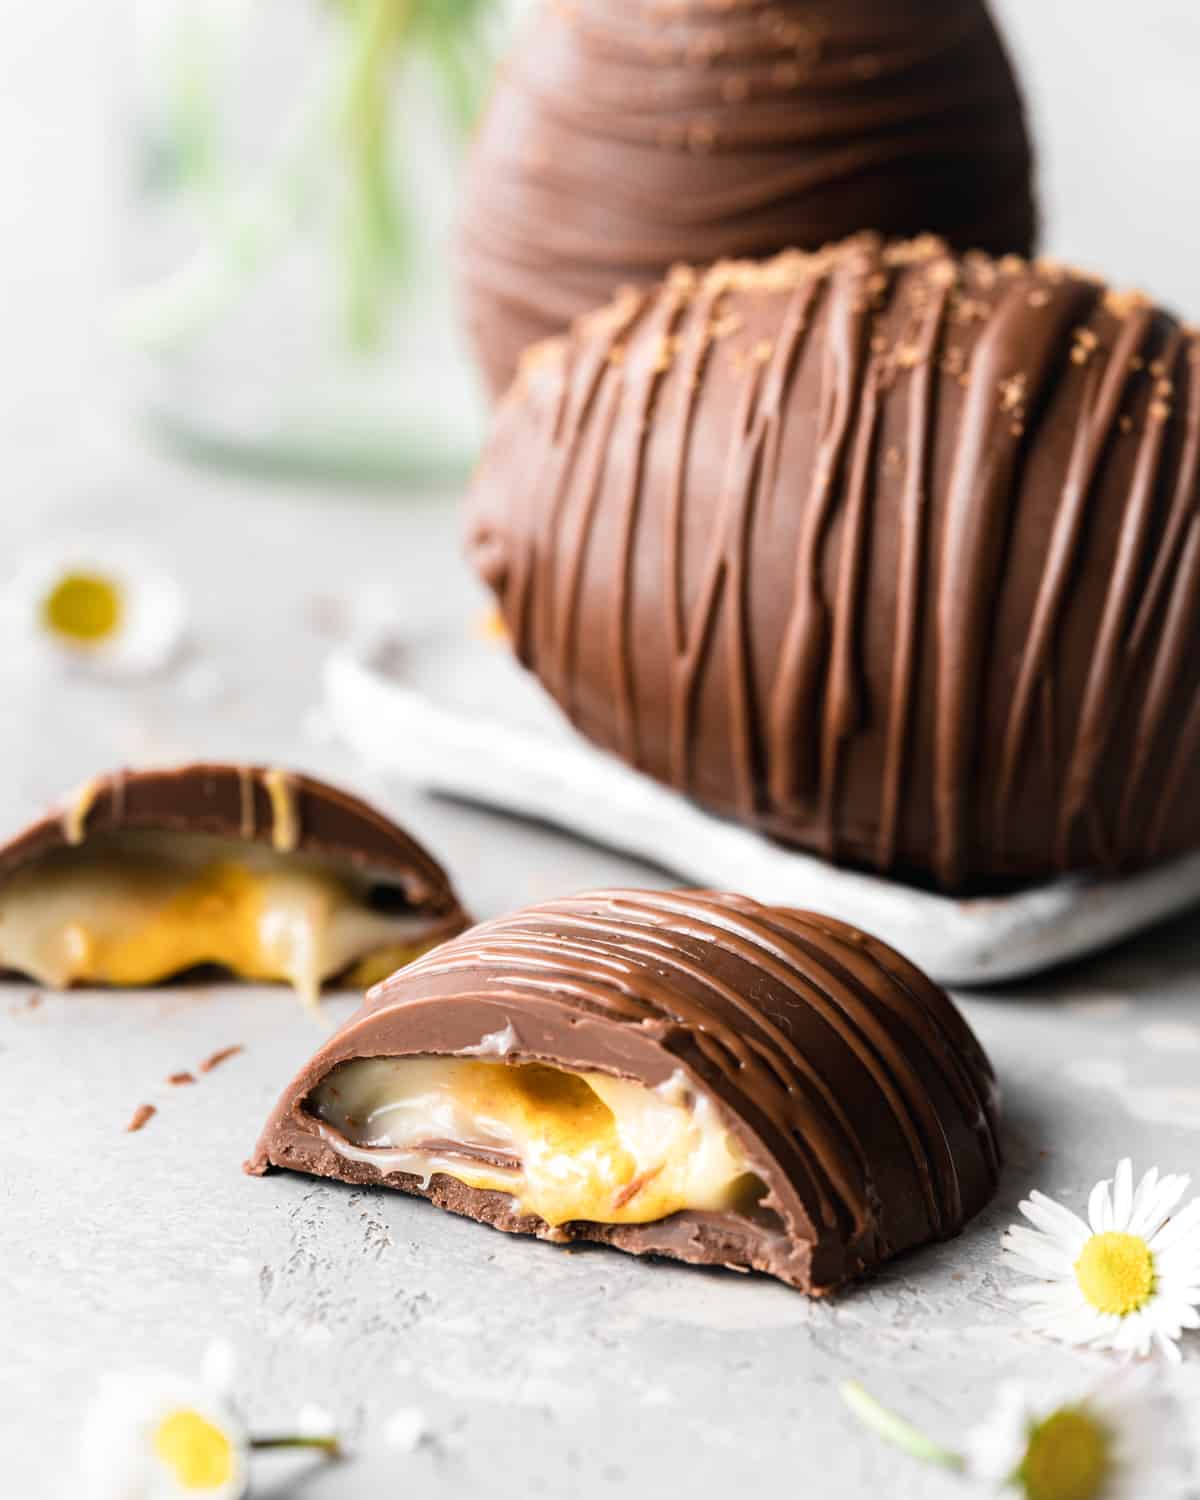 Vegan creme egg for Easter cut in half so you can see the filling inside.